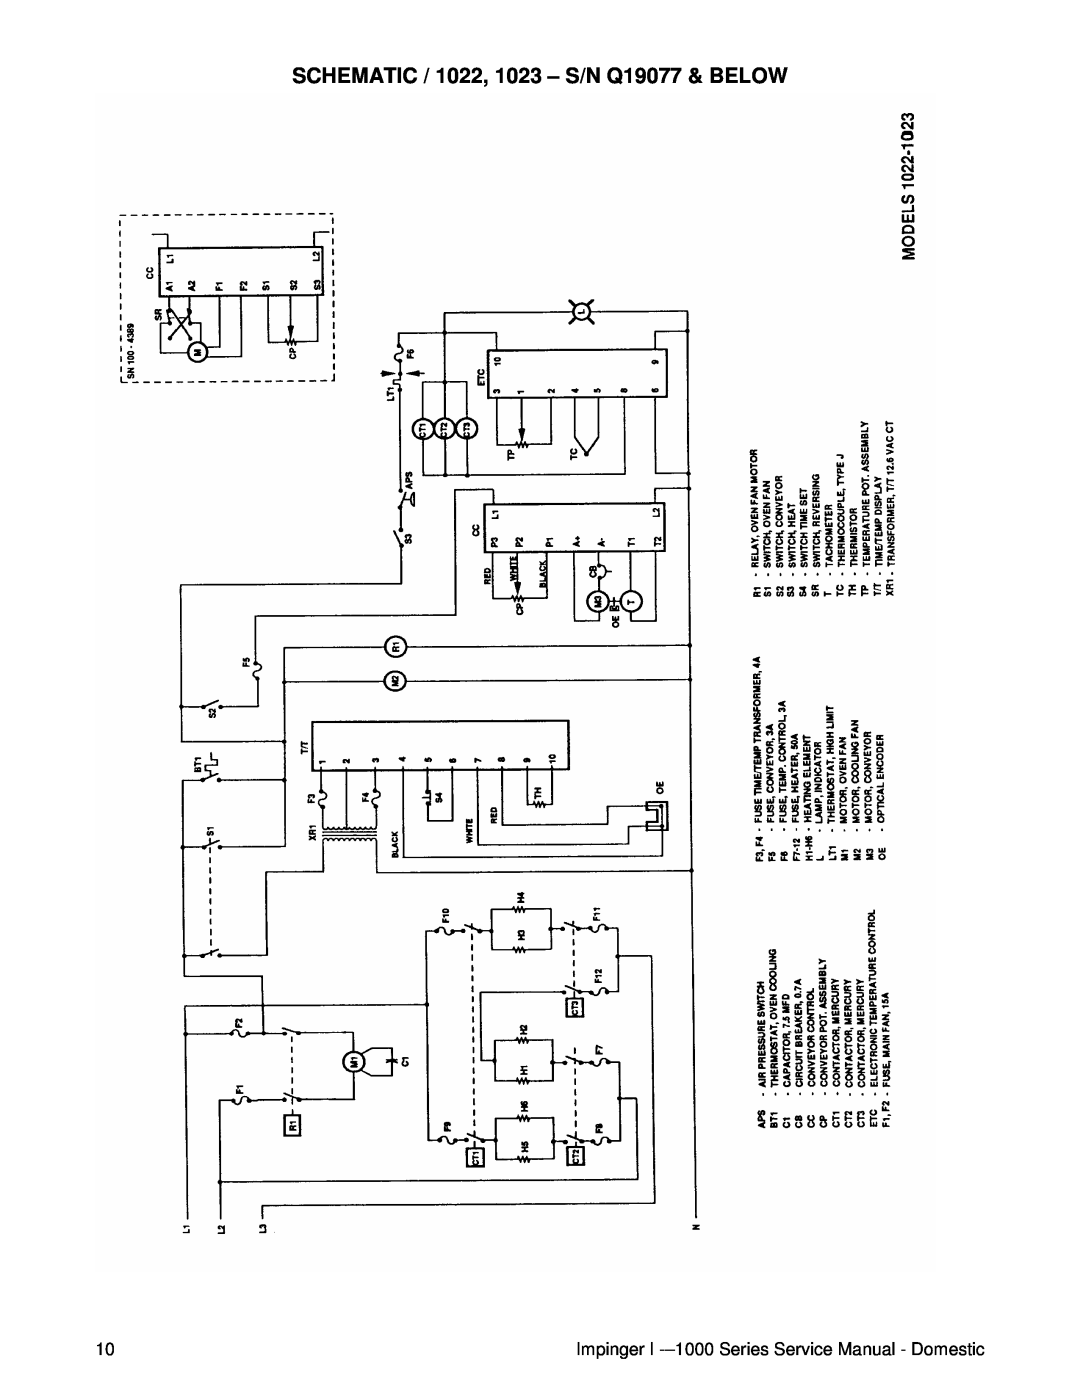 Lincoln 1200, 1400 SCHEMATIC / 1022, 1023 - S/N Q19077 & BELOW, Impinger I -–1000Series Service Manual - Domestic 